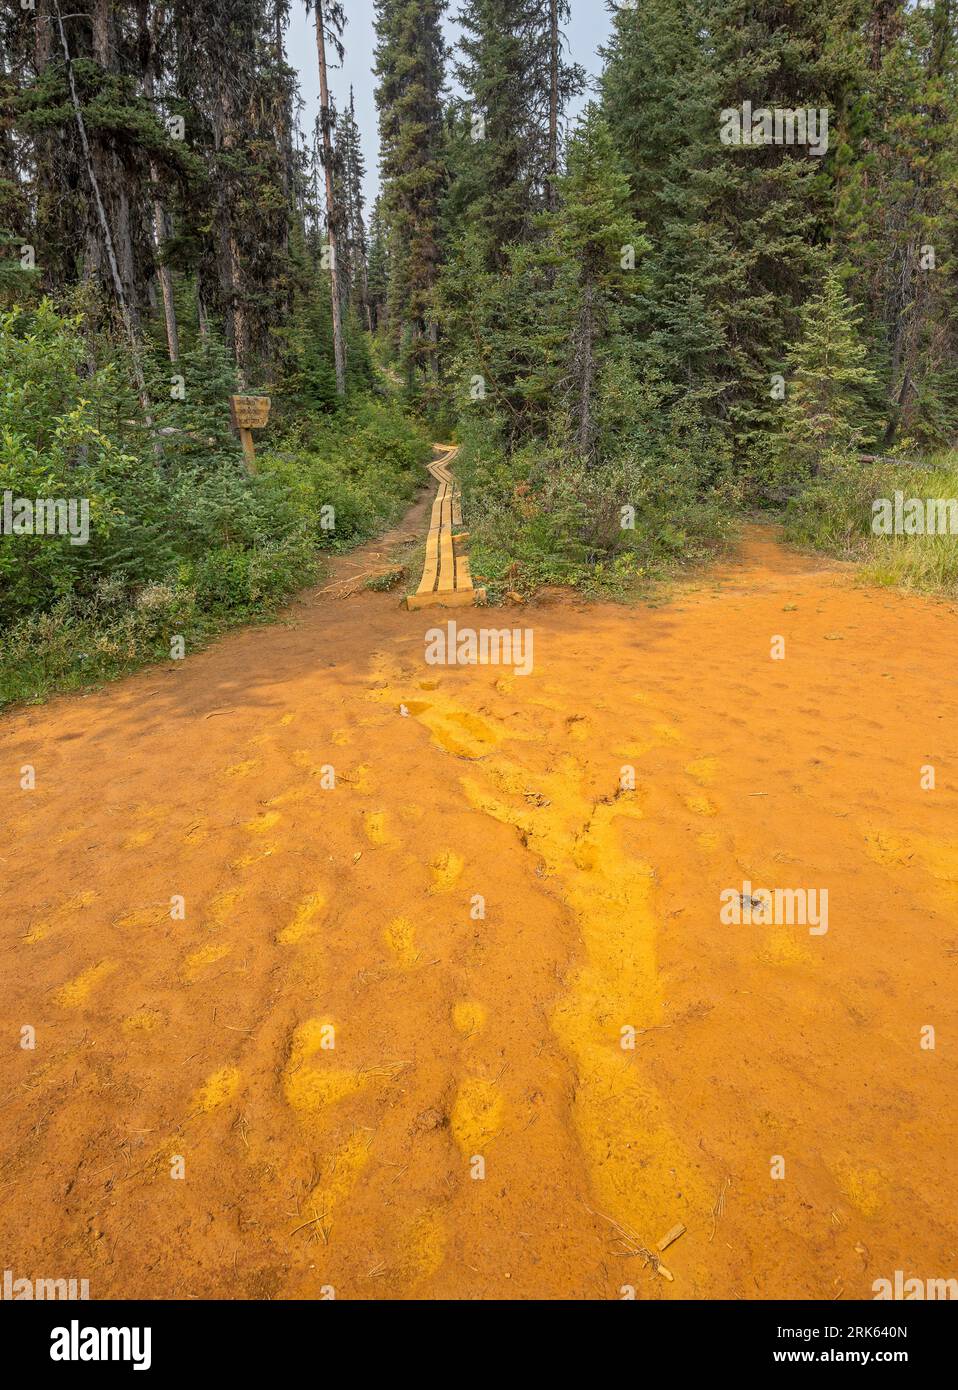 The site of an abandoned ochre mine resulting in stained ground and boardwalk in Kootenay National Park, British Columbia, Canada Stock Photo